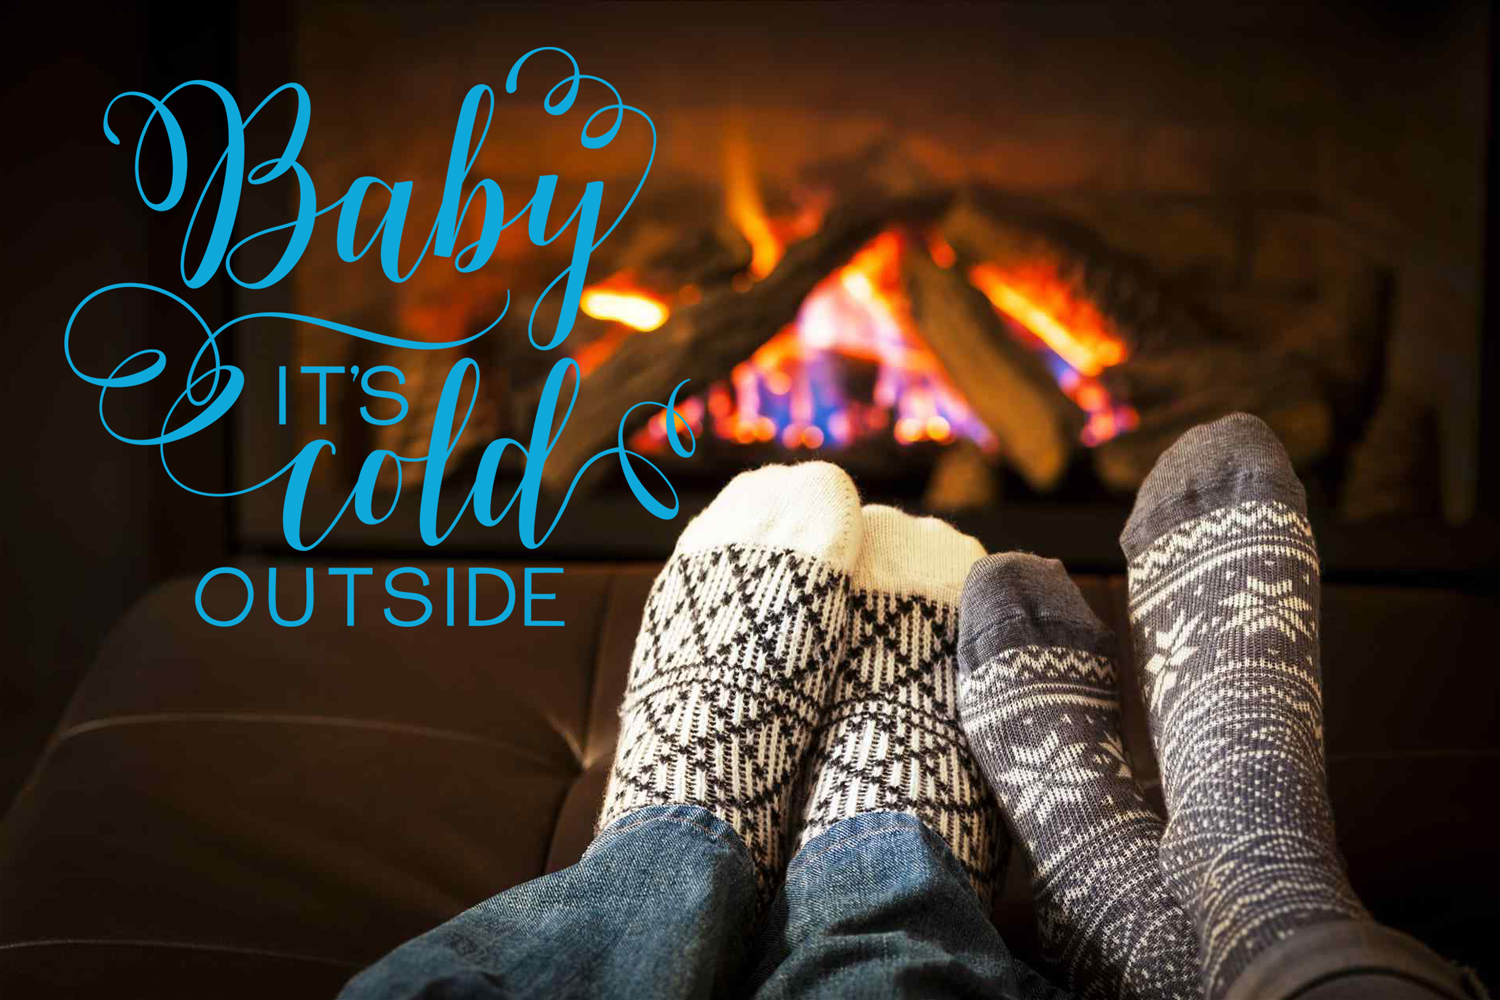 Baby its cold outside…. where are the ecofreaks today?